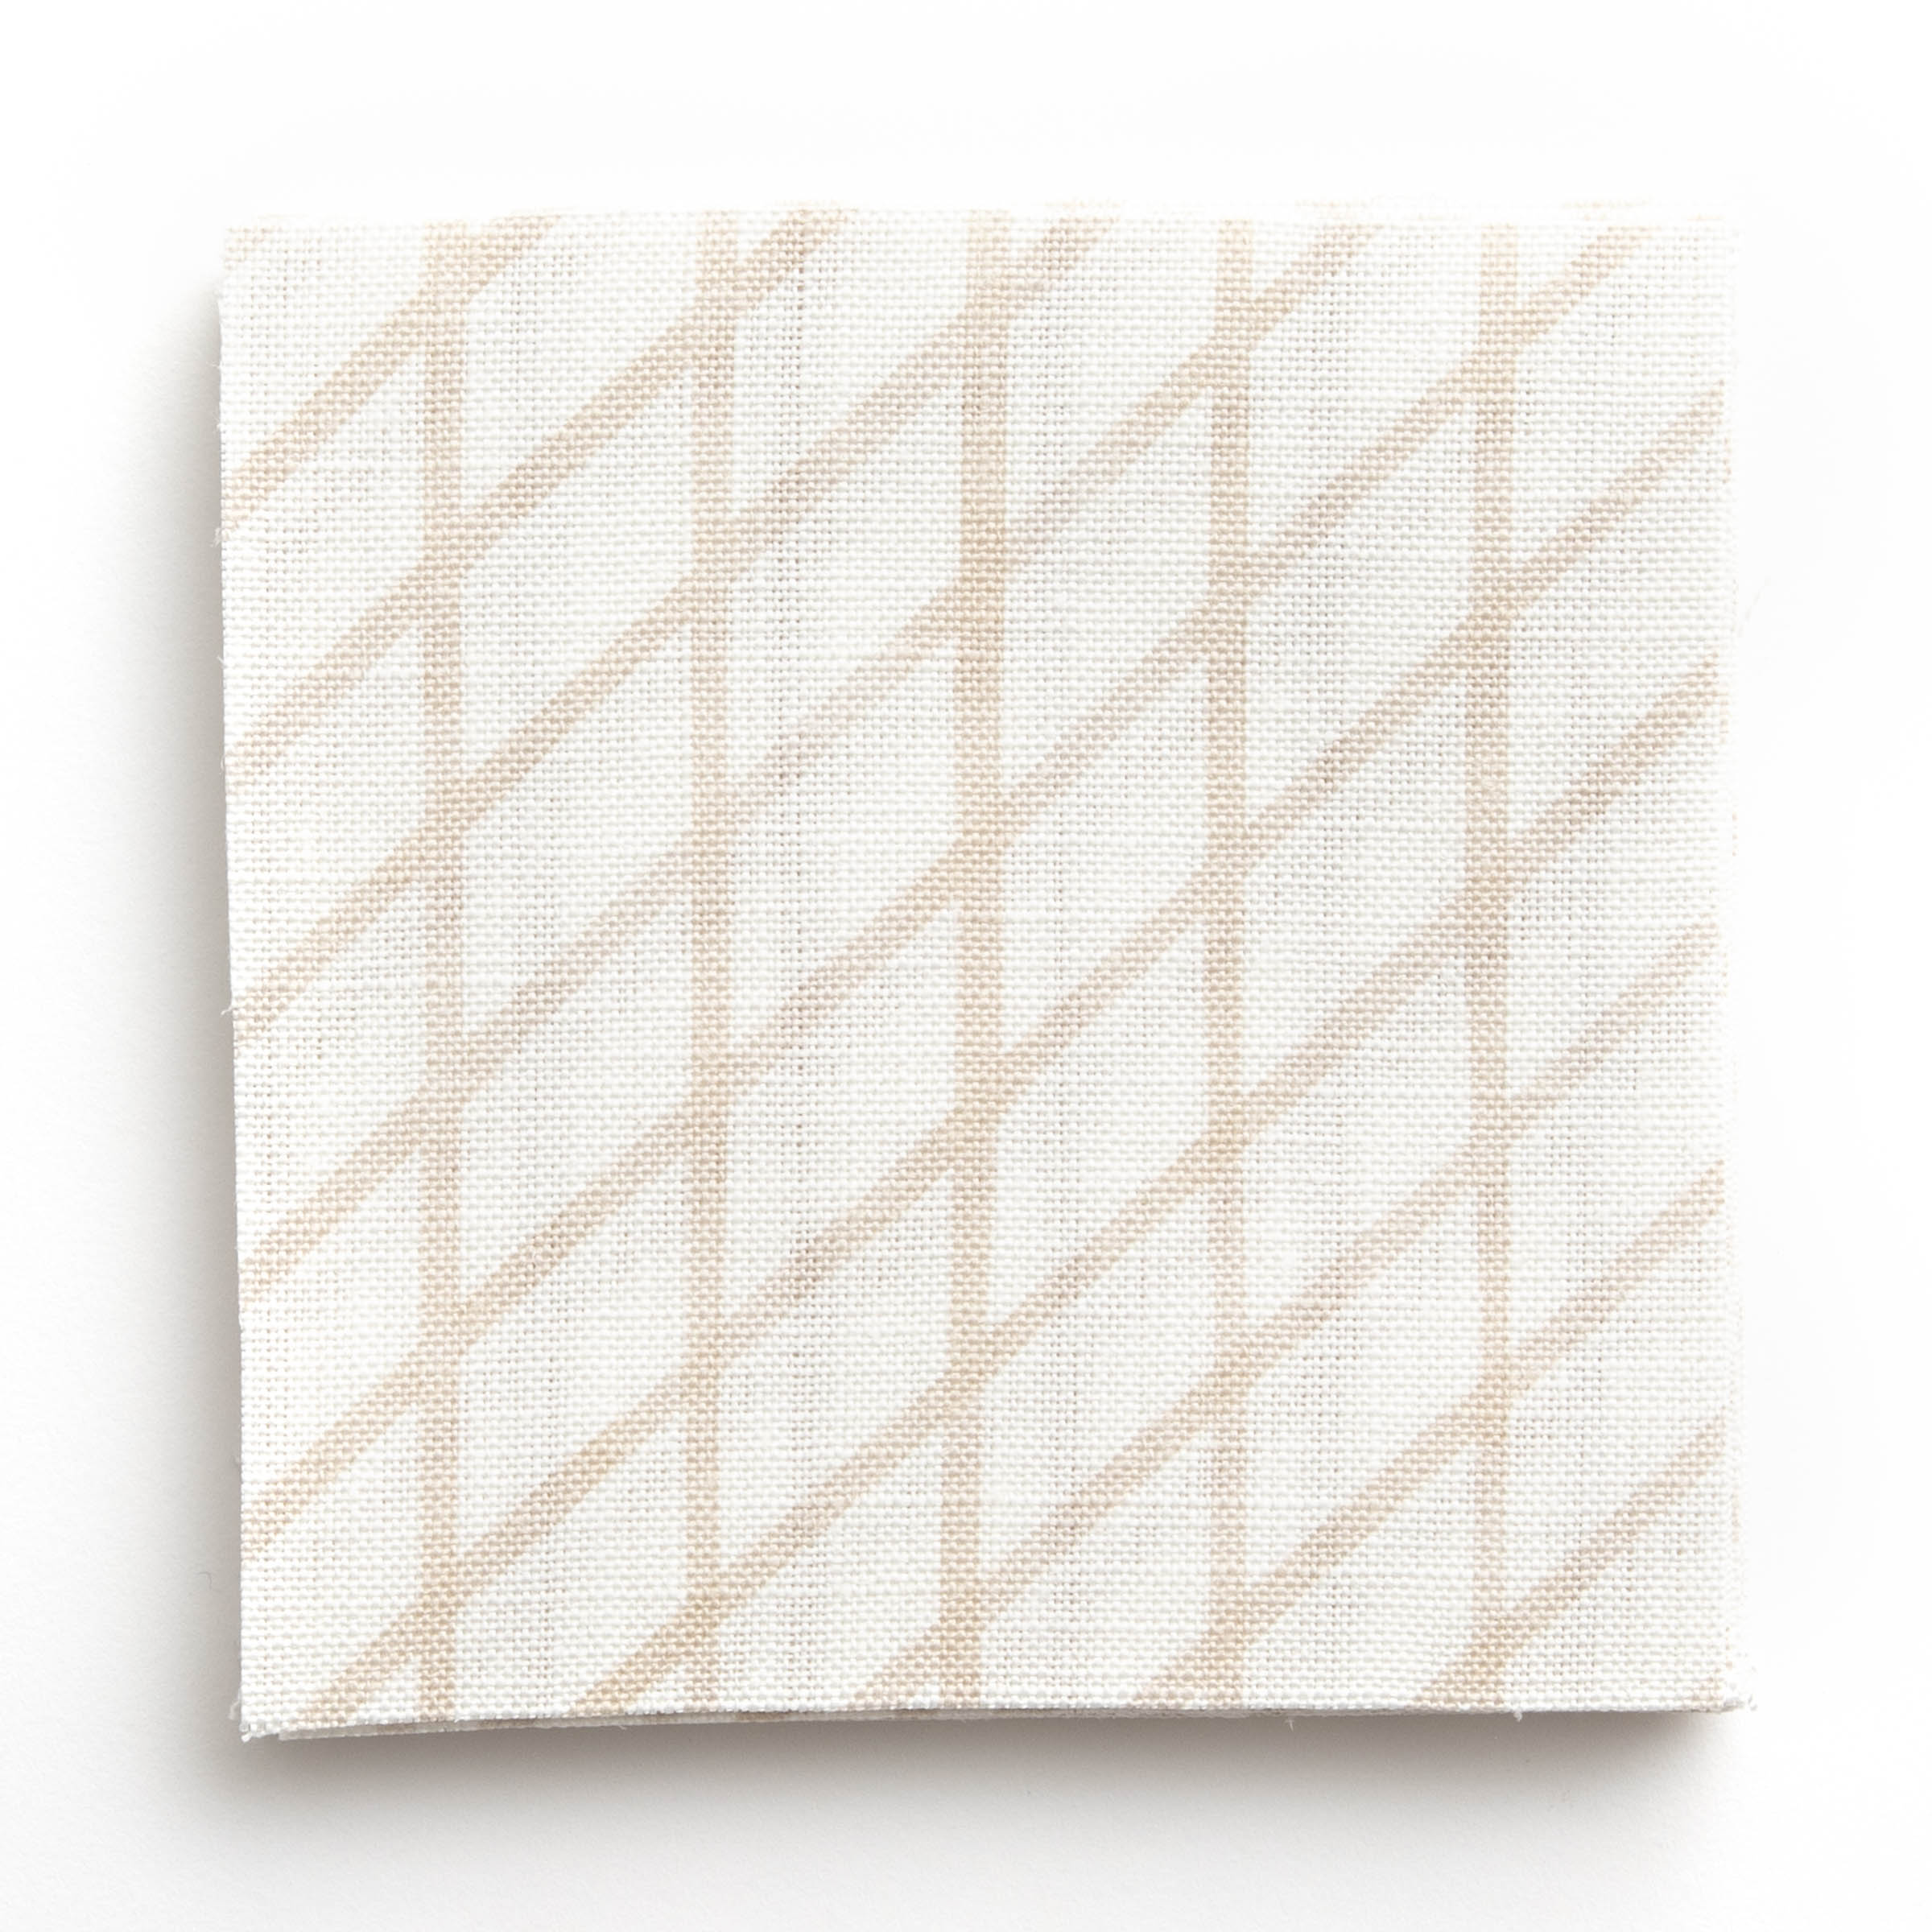 A stack of fabric swatches in an uneven grid pattern in cream on a white field.